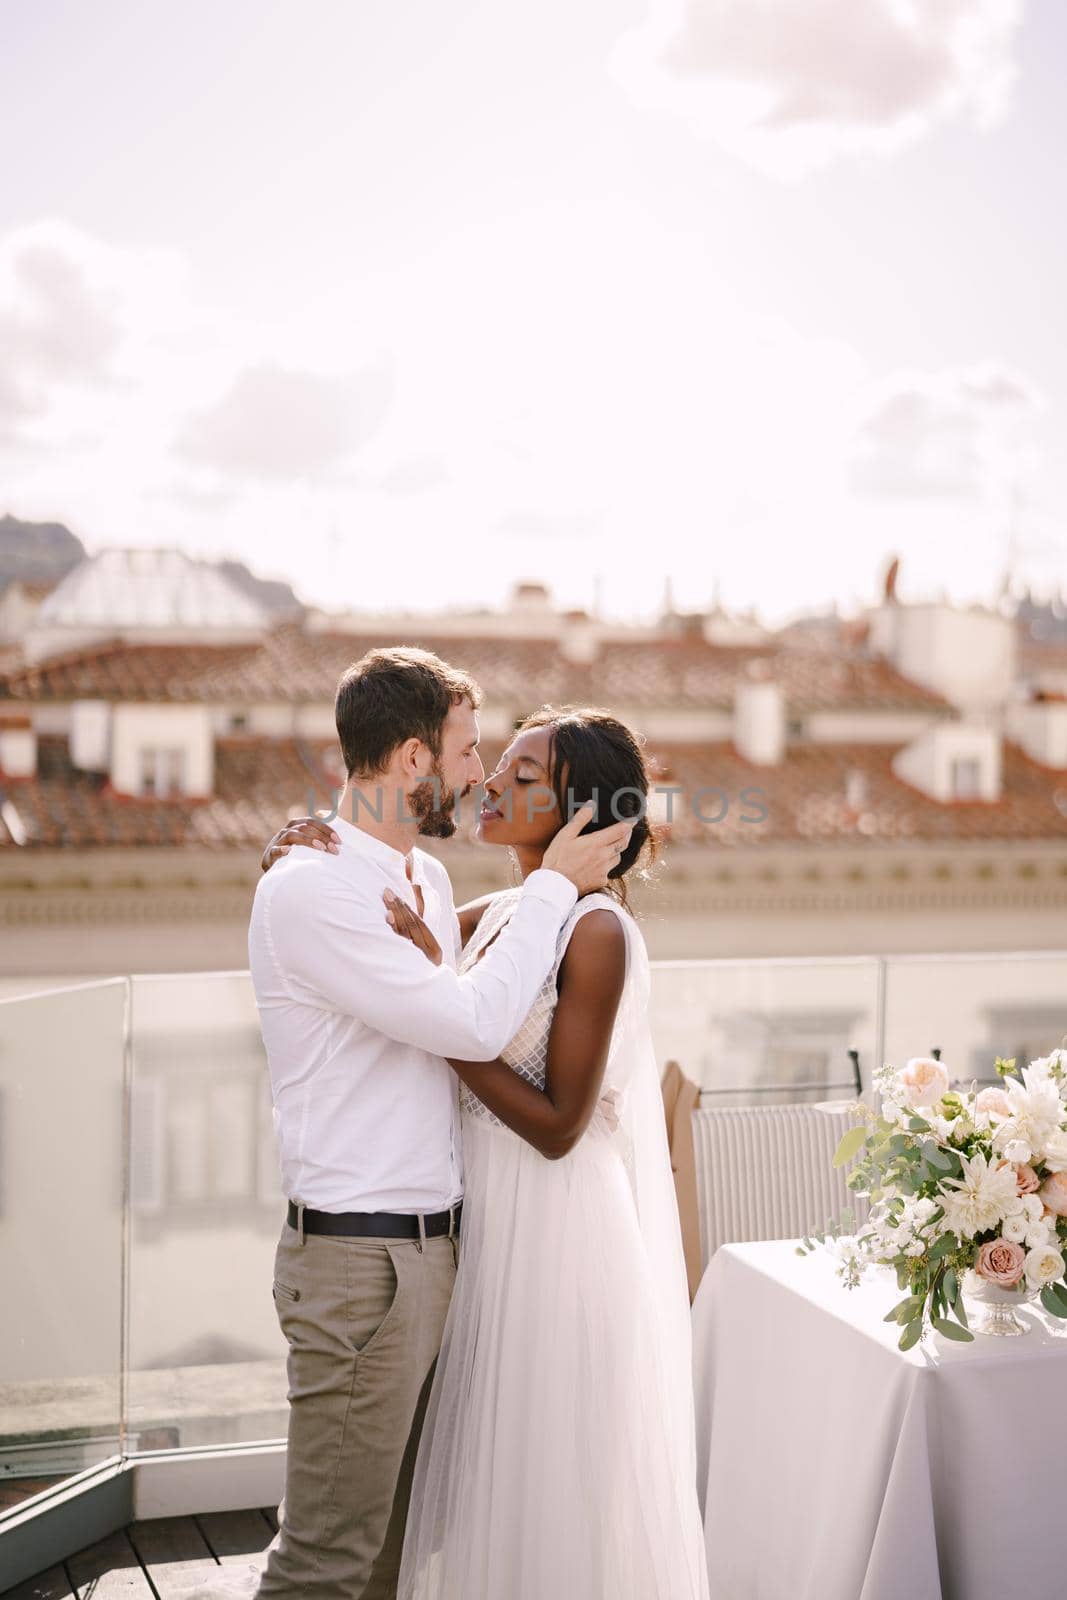 Destination fine-art wedding in Florence, Italy. Mixed-race wedding couple. African-American bride and Caucasian groom stand near the table for a wedding dinner. by Nadtochiy